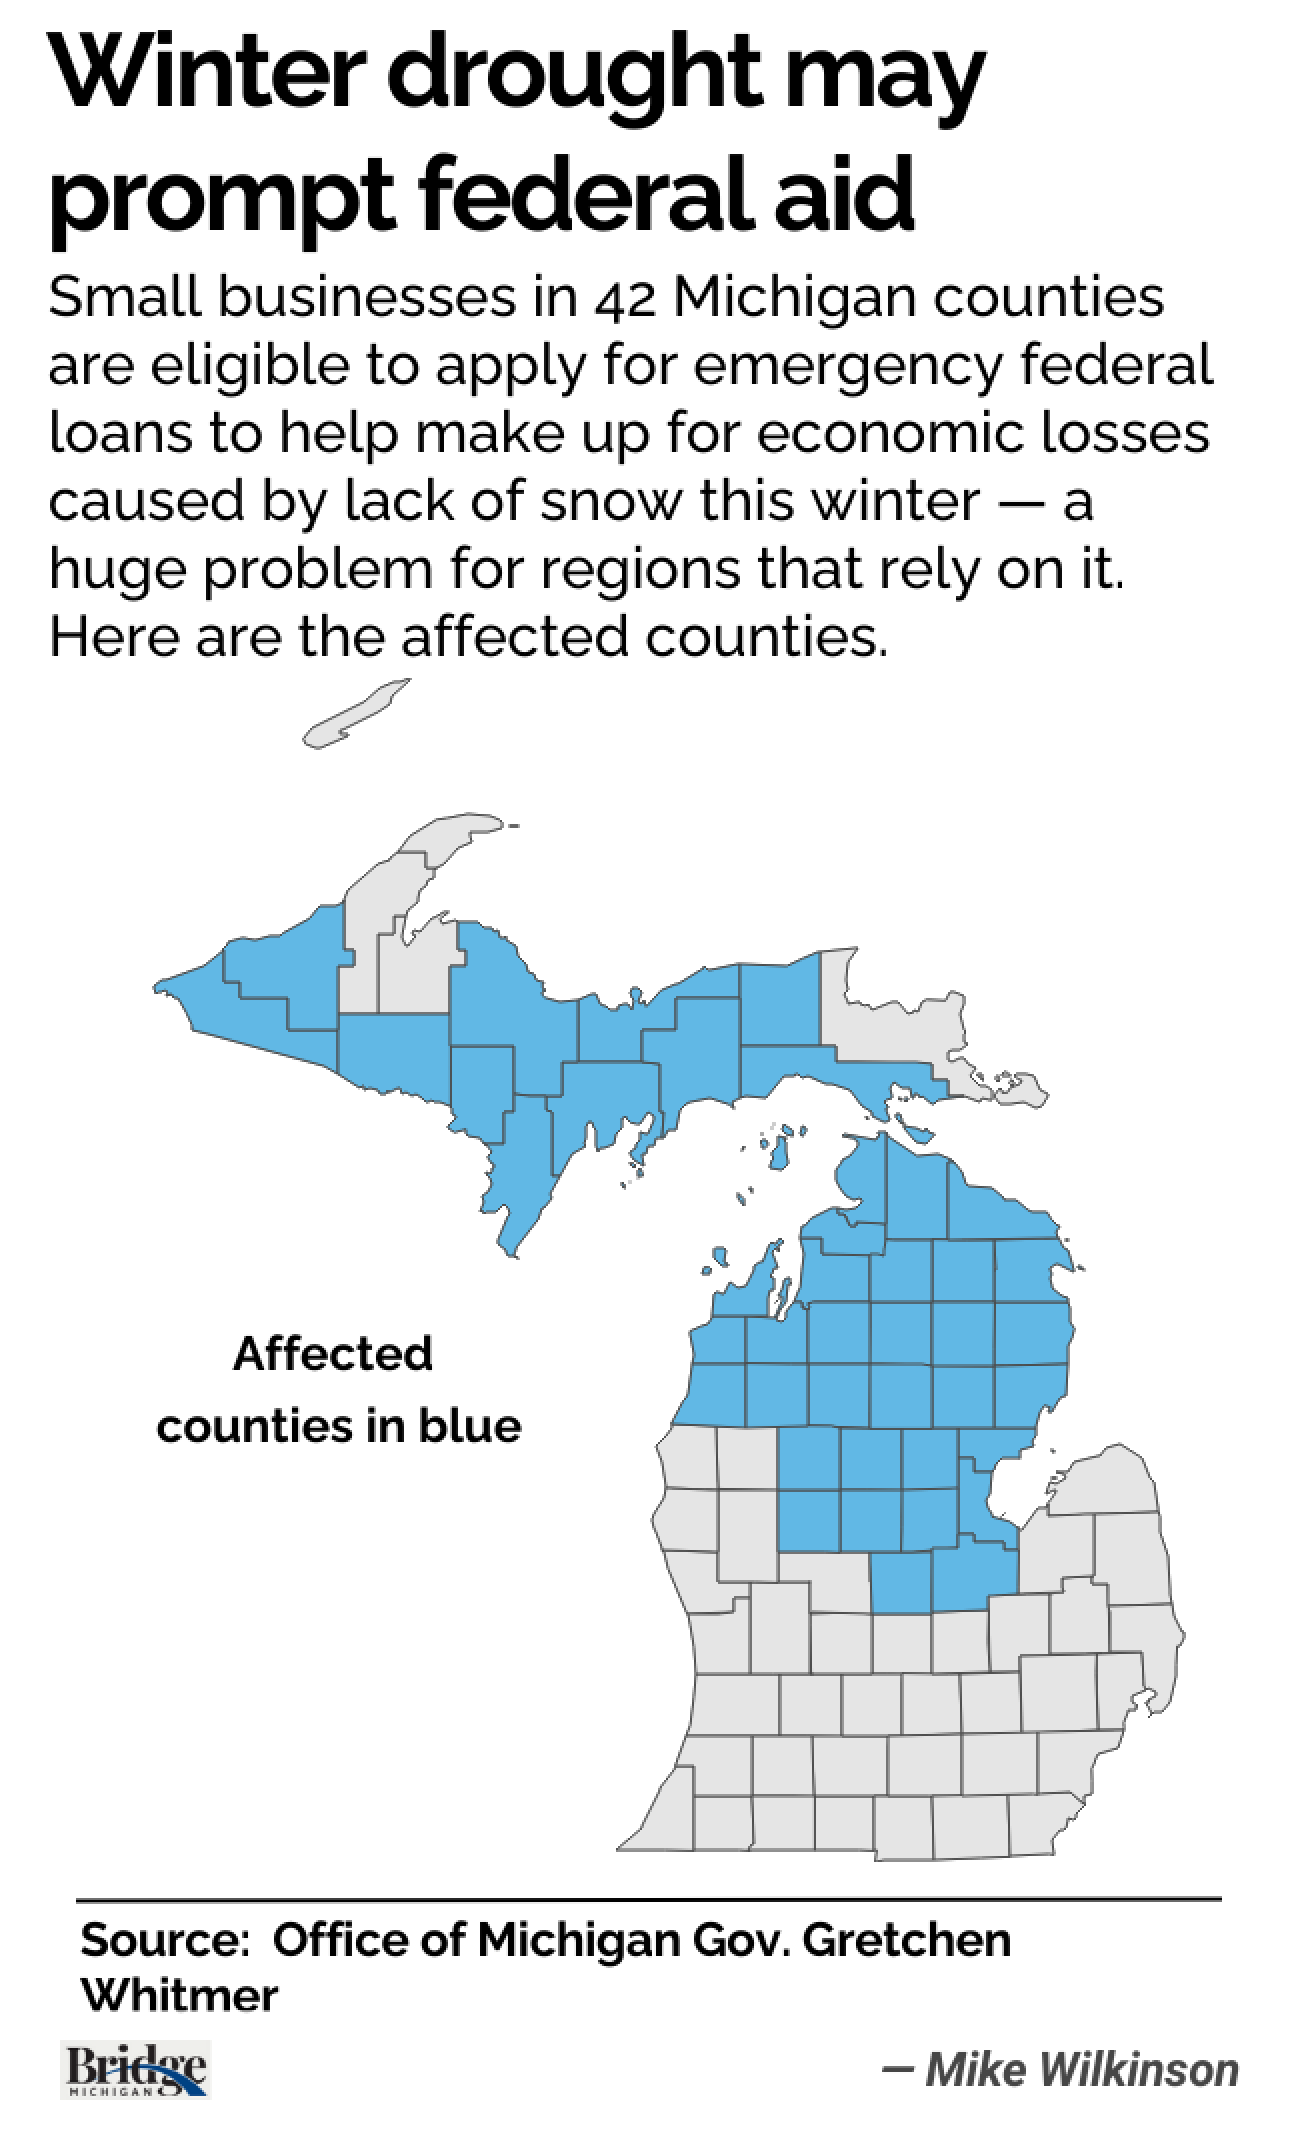 map about winter drought in Michigan